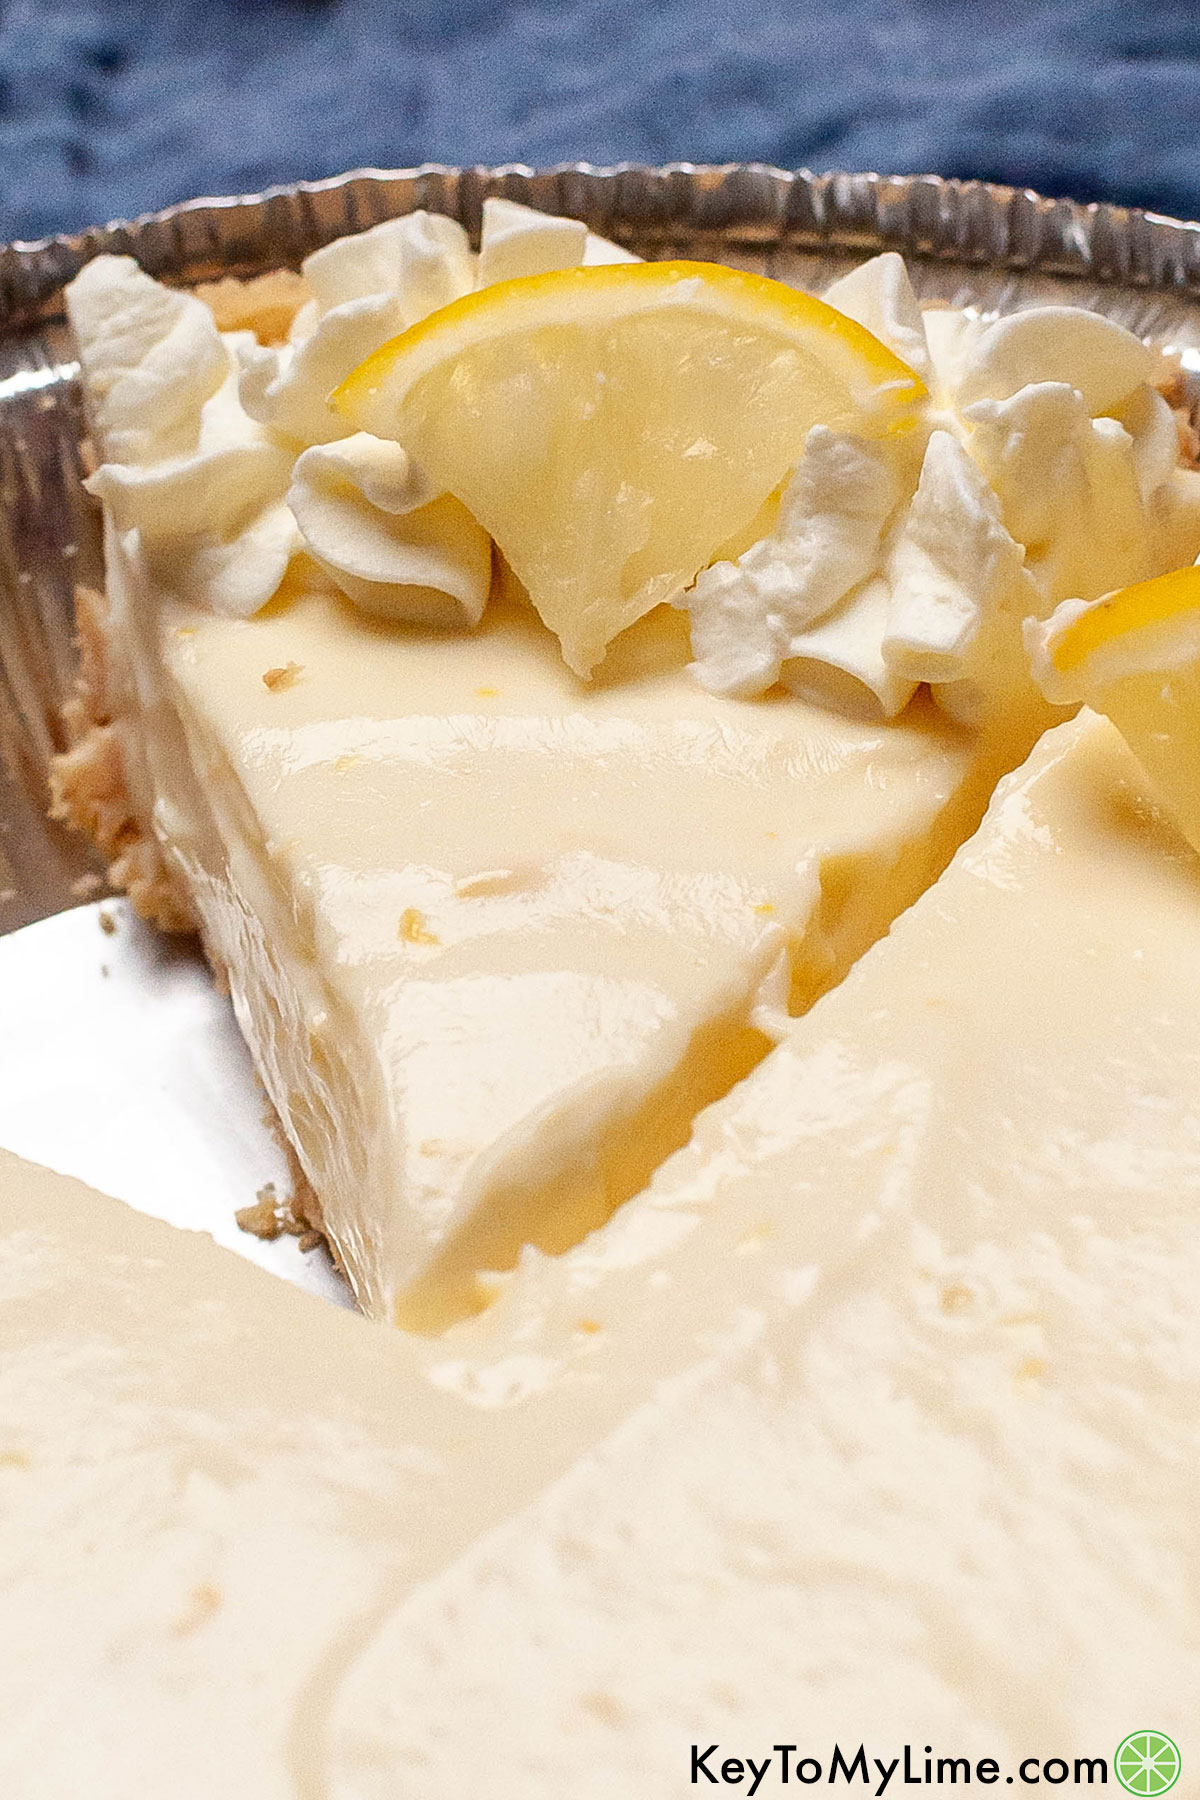 A close in of a partially cut lemon pie garnished with fresh lemon and whipped cream.